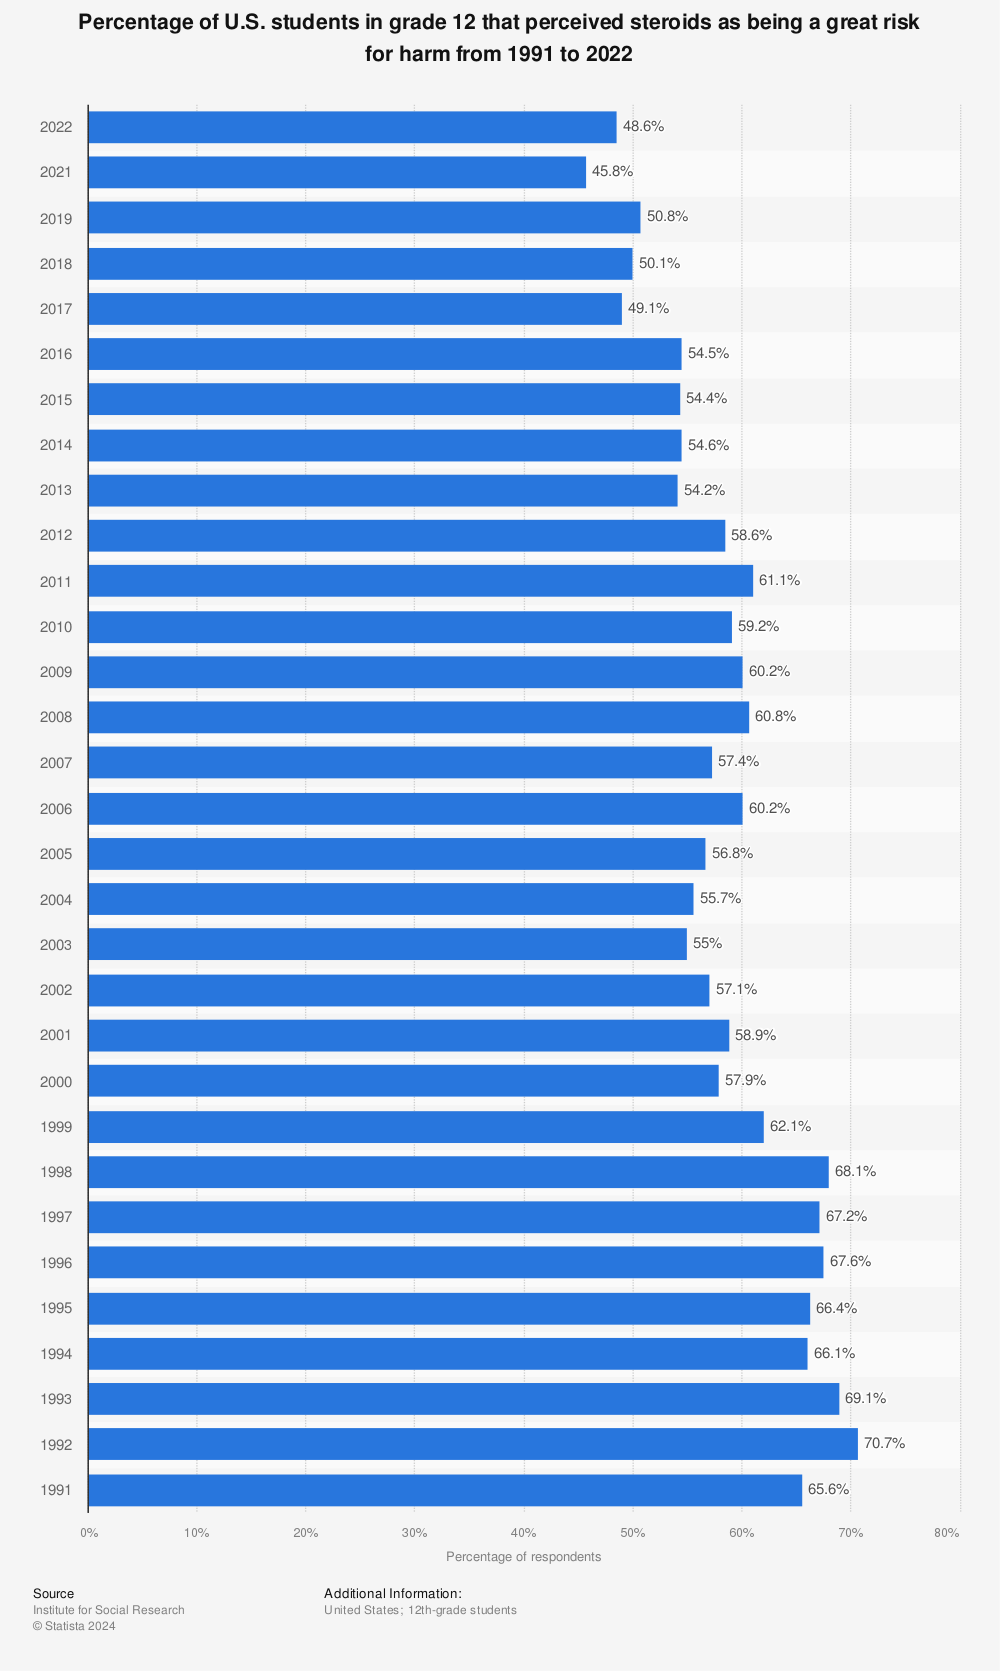 Statistic: Percentage of U.S. students in grade 12 that perceived steroids as being a great risk for harm from 1991 to 2022 | Statista